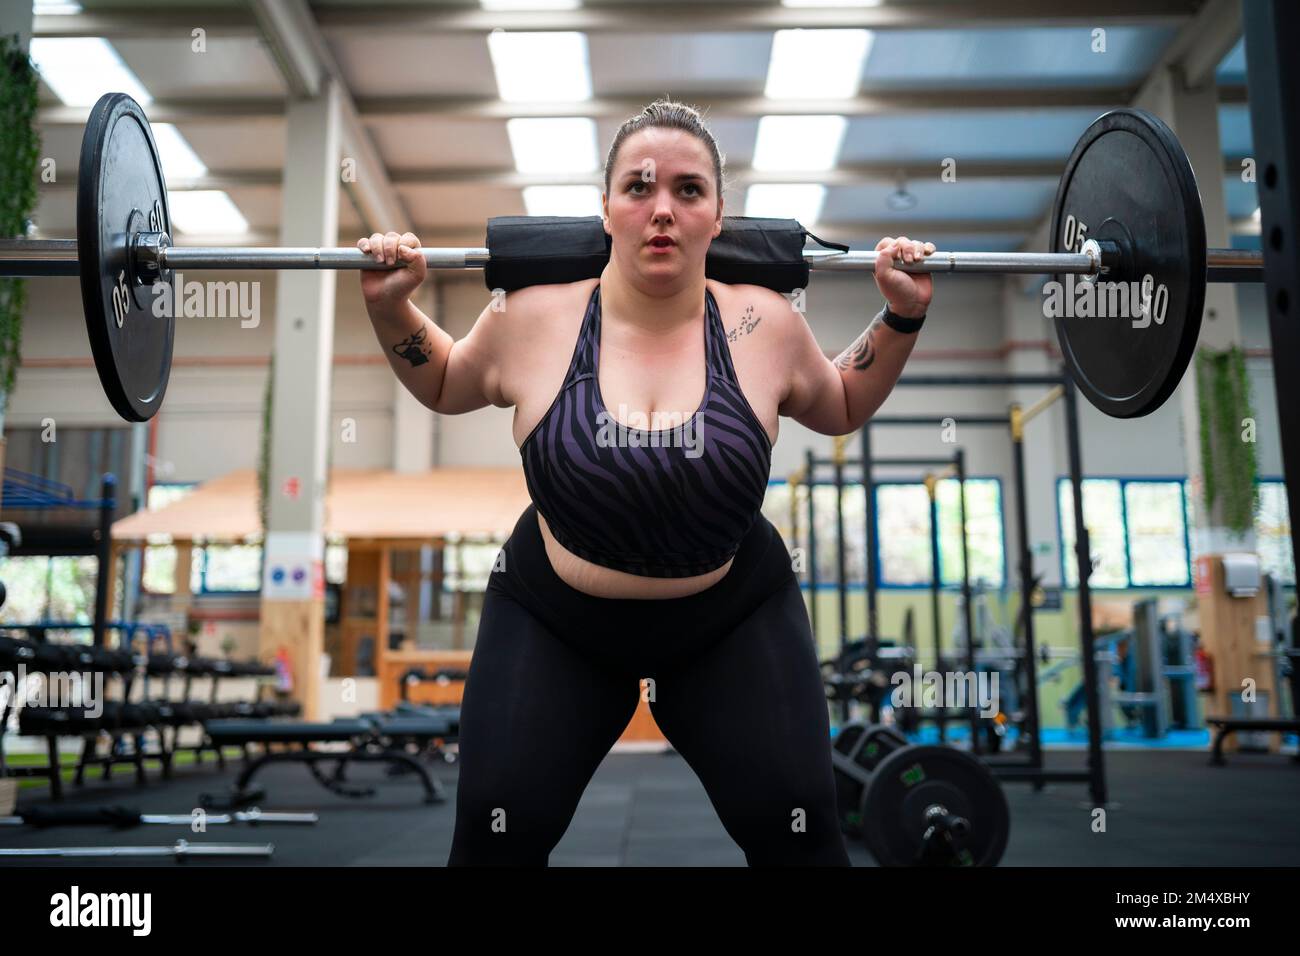 Personal Trainer Showing Young Woman How To Train Barbell Squats Exercise  In A Gym Stock Photo - Alamy